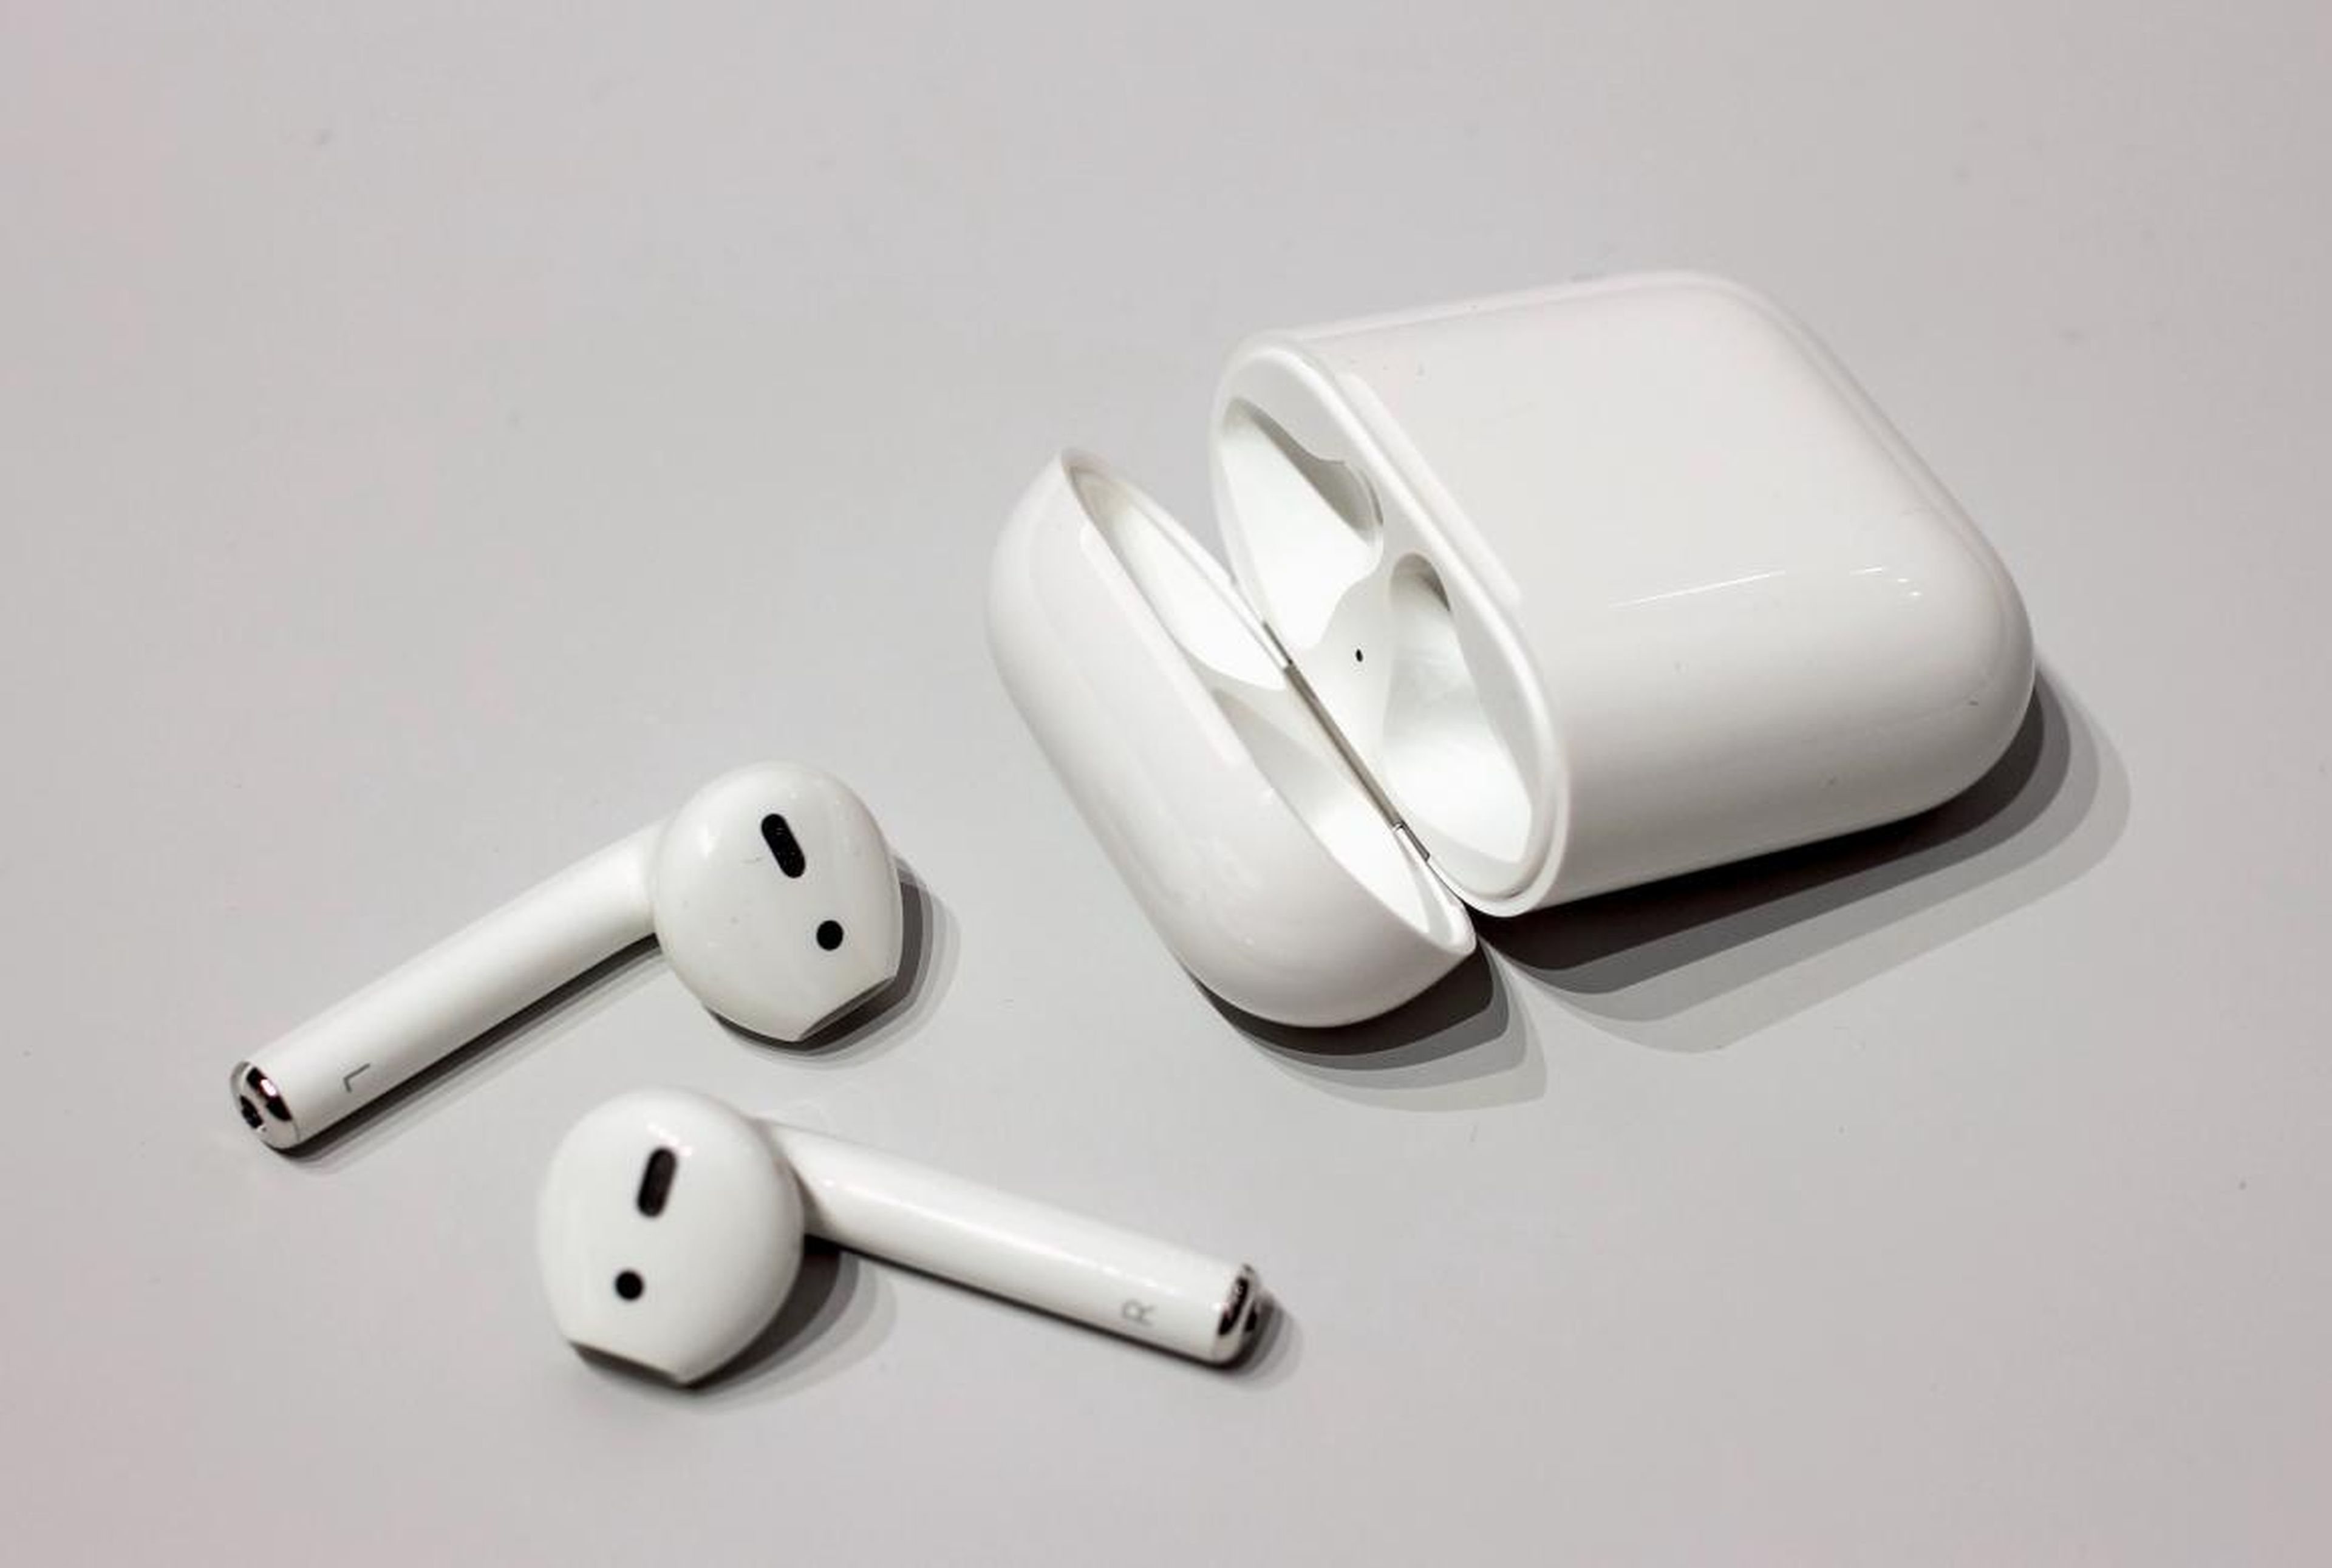 Apple's wireless AirPods have been a big seller for the company.